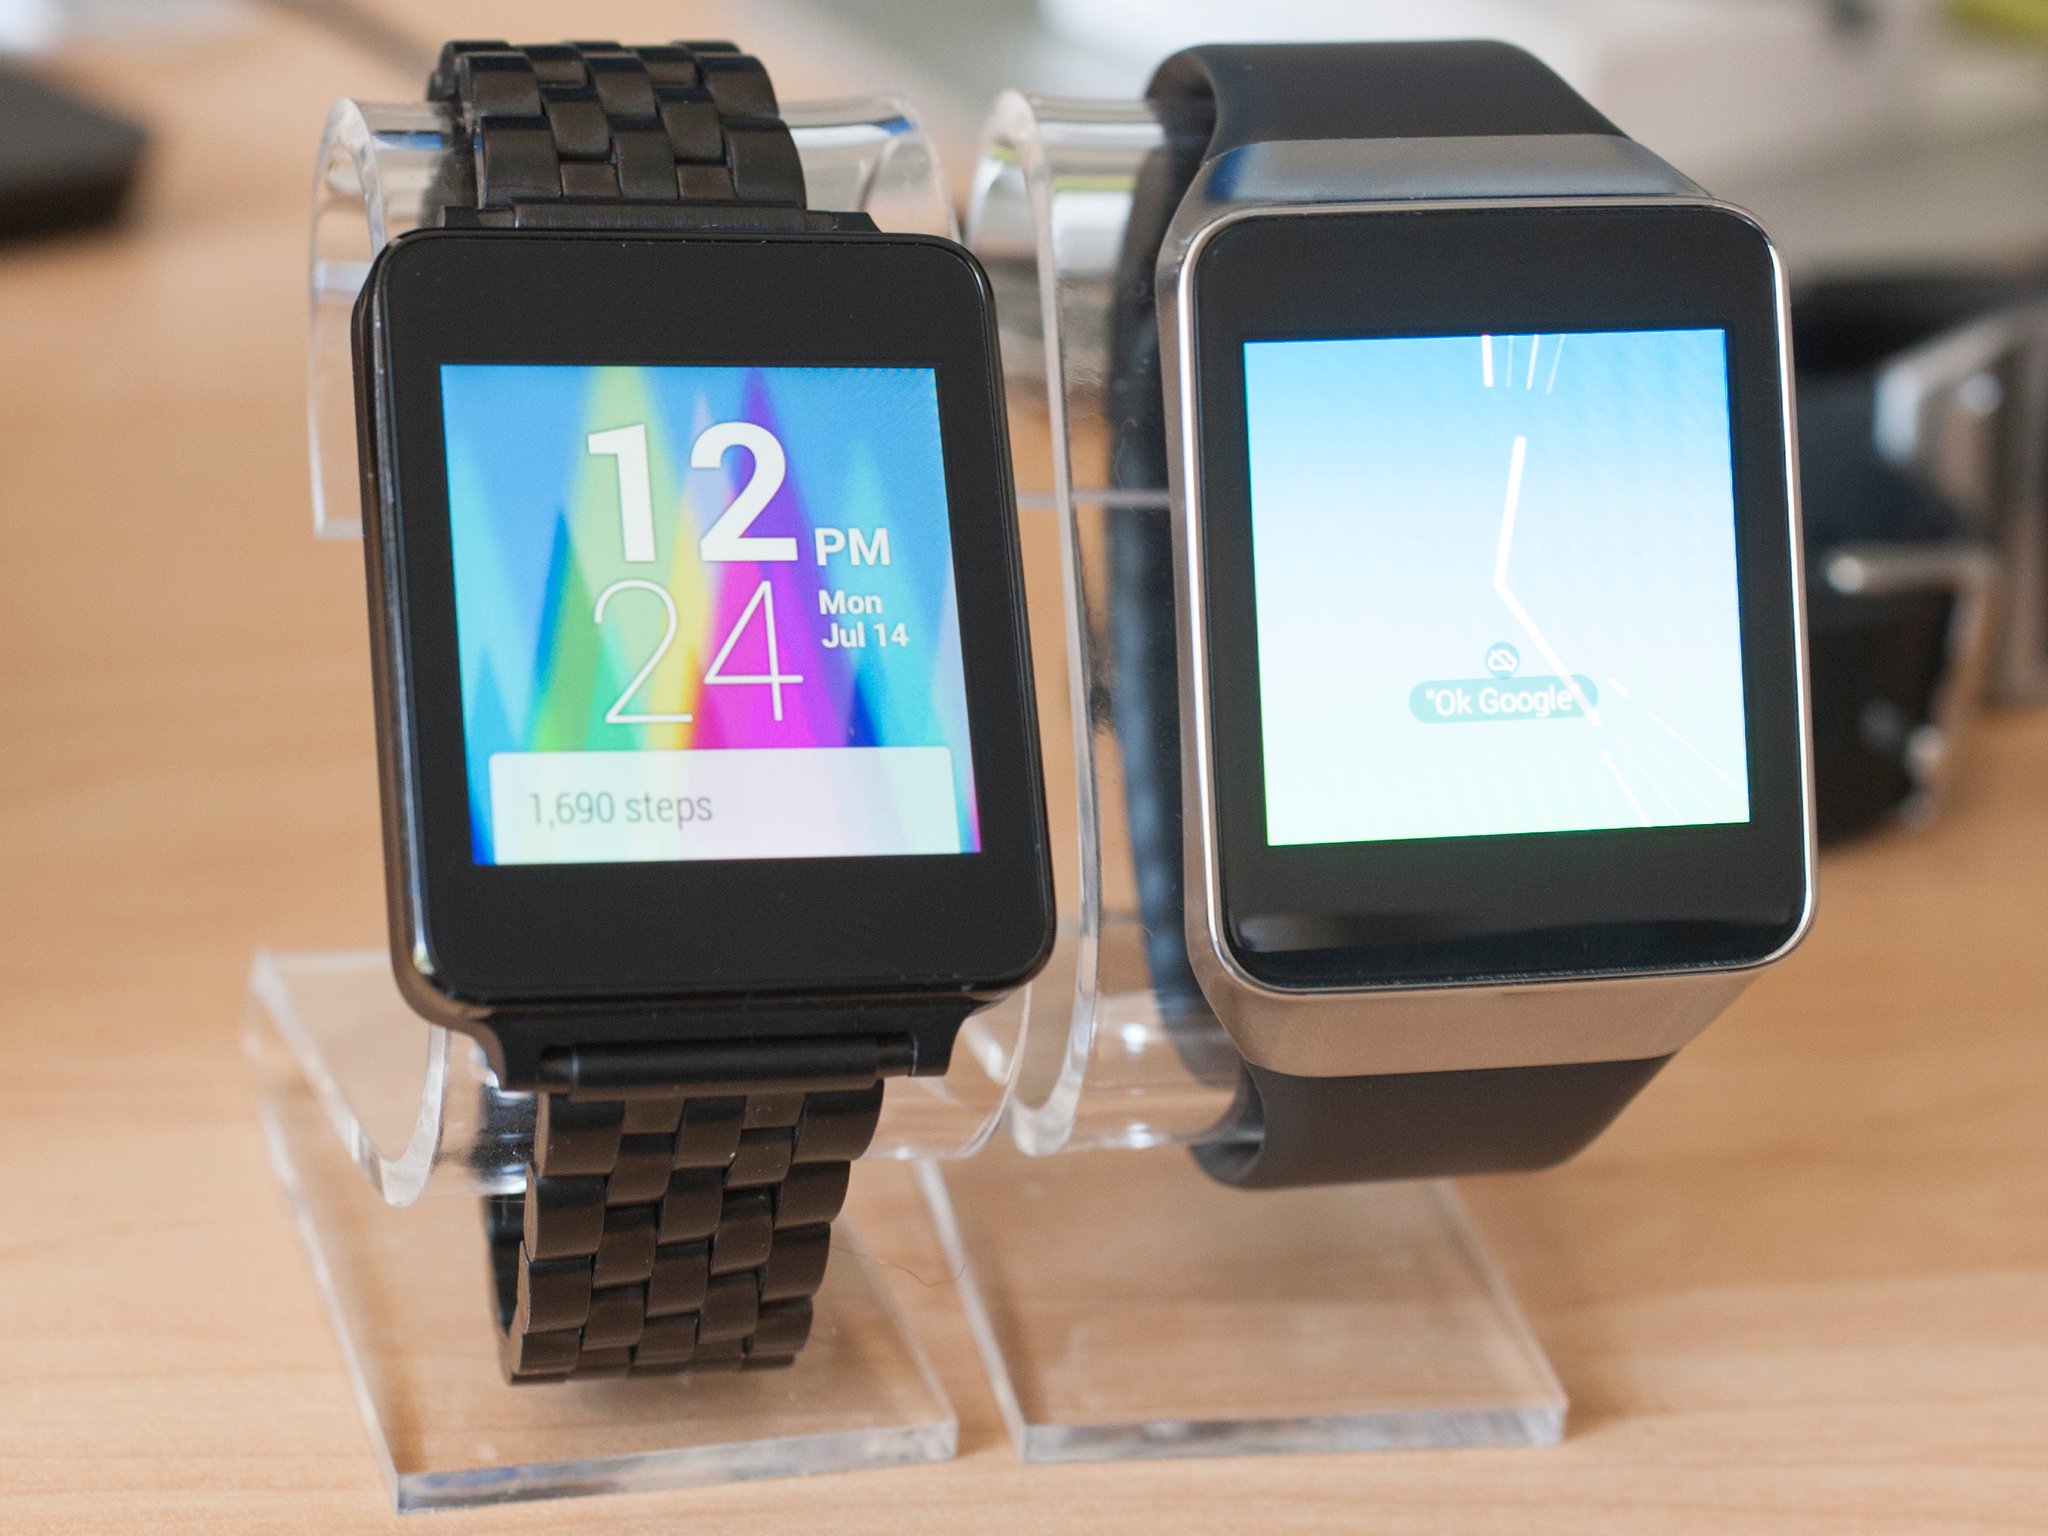 LG G Watch and Samsung Gear Live